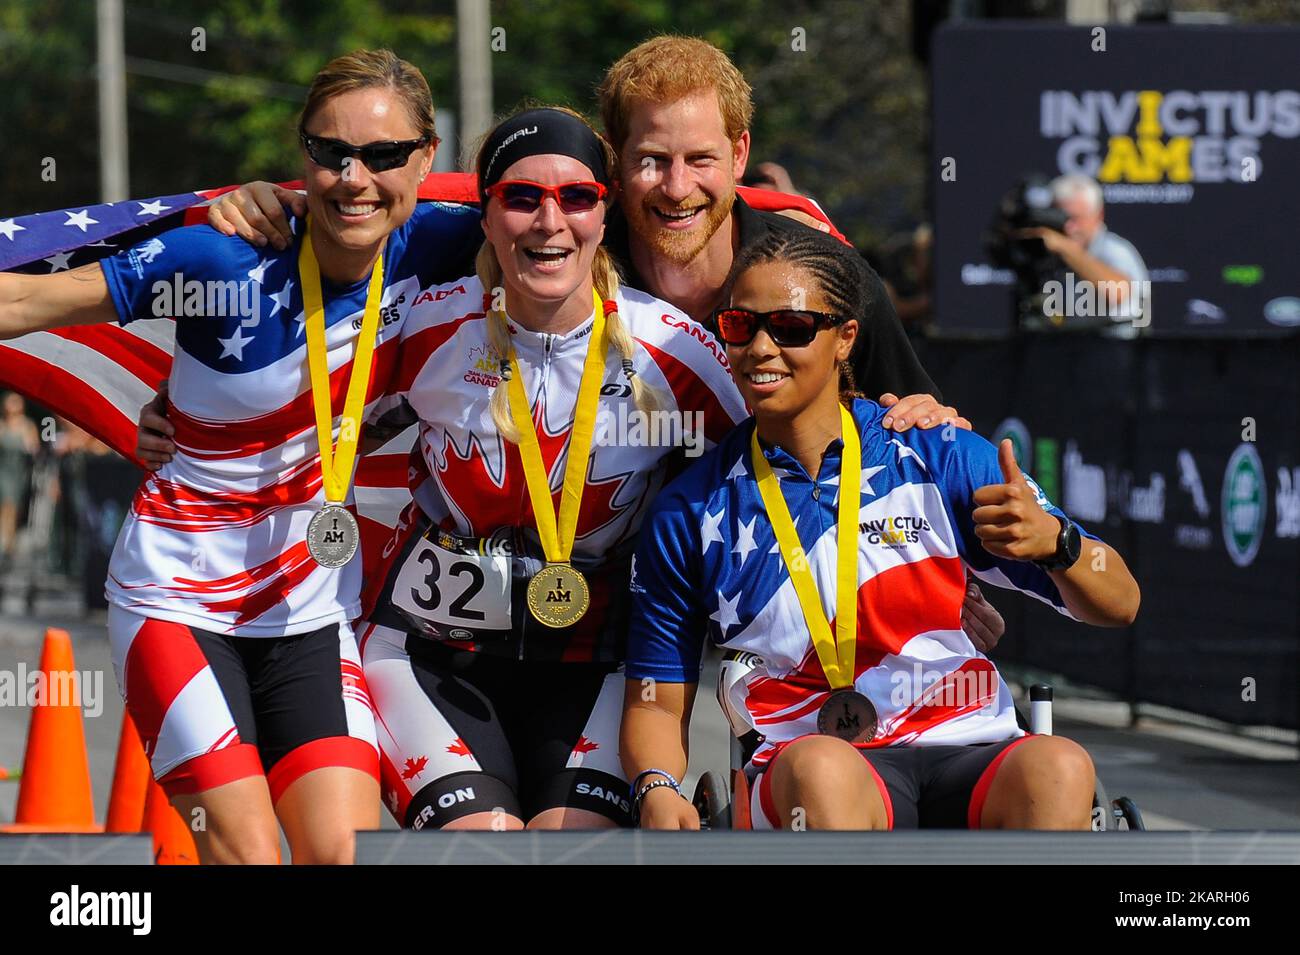 Prince Harry poses with medalists in the Women's Recumbent Bike IRECB1 time trial, (L-R) silver medalist Amy Dotson of the United States, gold medalist Julie Marcotte of Canada and bronze medalist Gabby Graves-Wake of the United States at the cycling time trial at the Invictus Games in High Park in Toronto, Ontario, September 26, 2017. The first Invictus Games, based on the Paralympic Games, were held in September 2014 in London. They were launched by Prince Harry, who served with the British Army in Afghanistan. (Photo by Anatoliy Cherkasov/NurPhoto) Stock Photo